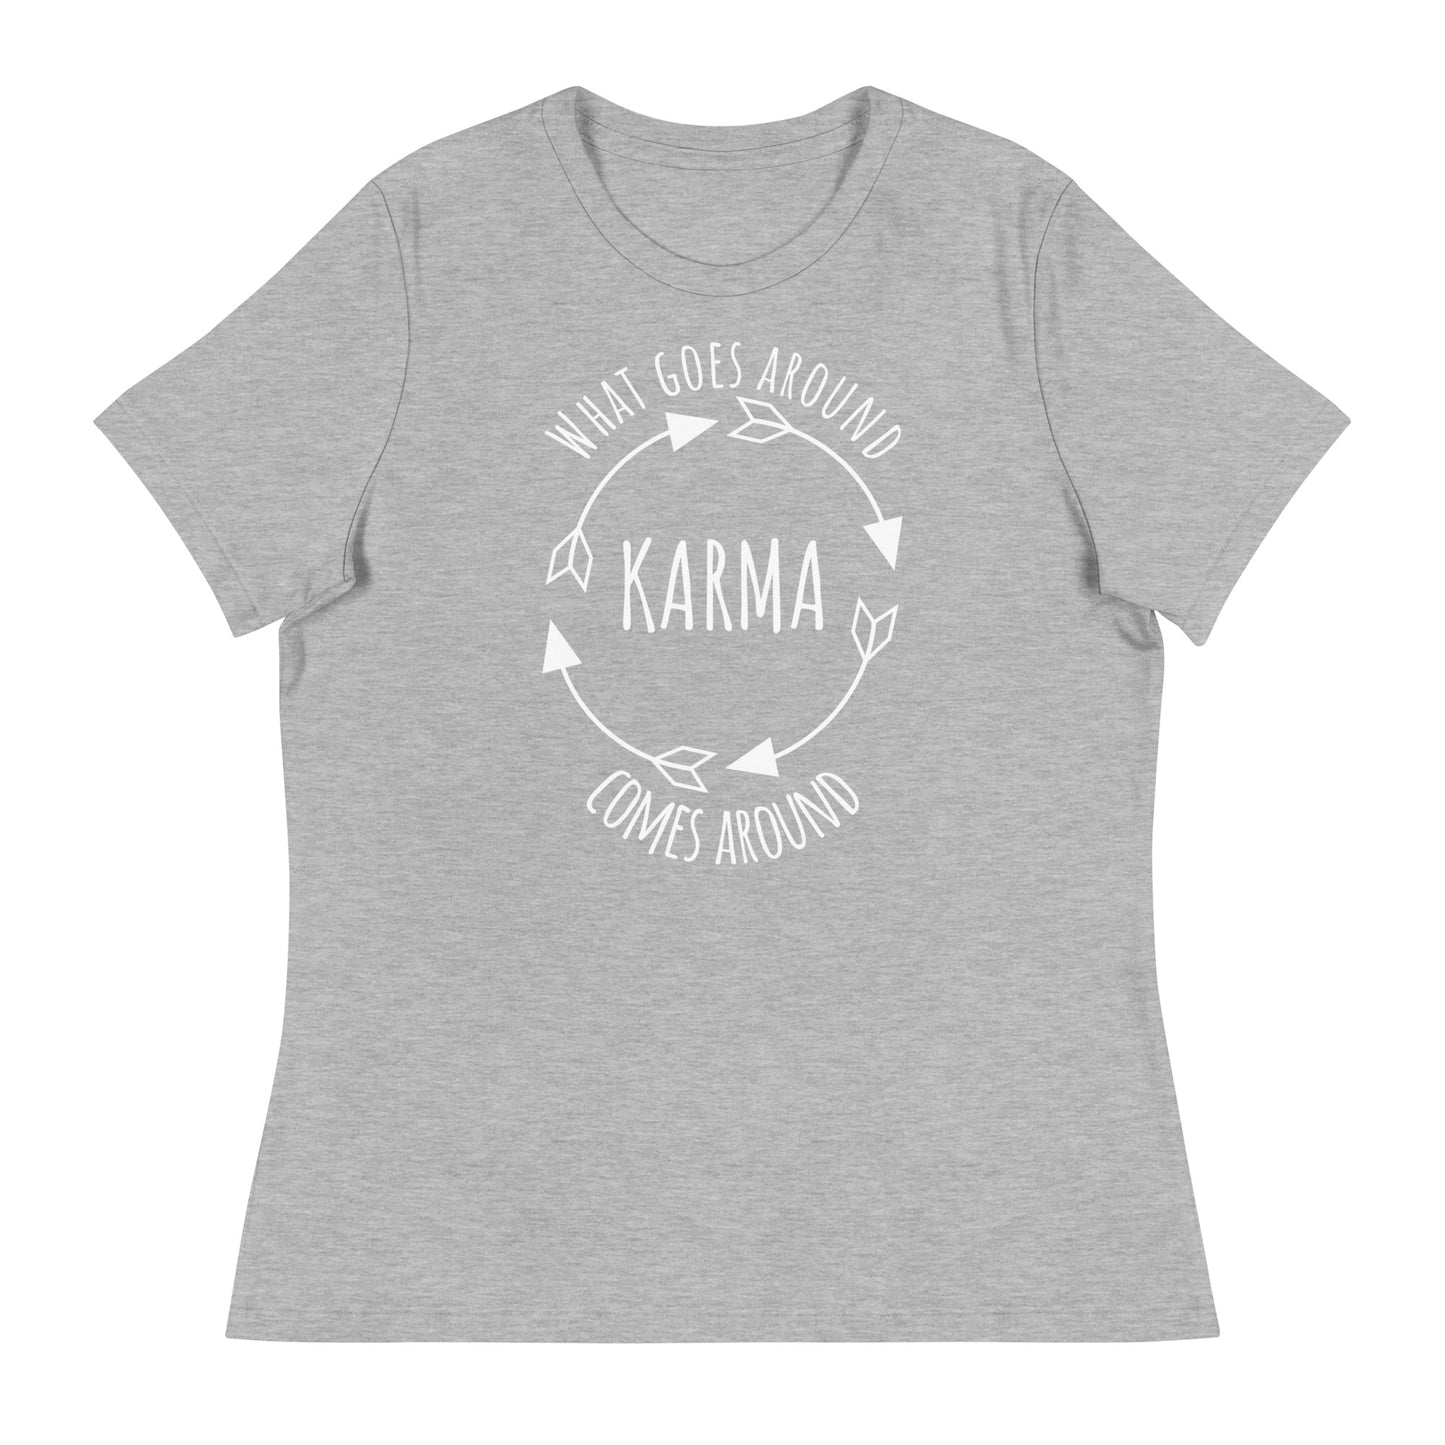 KARMA - what goes around comes around - women's tee (white lettering)